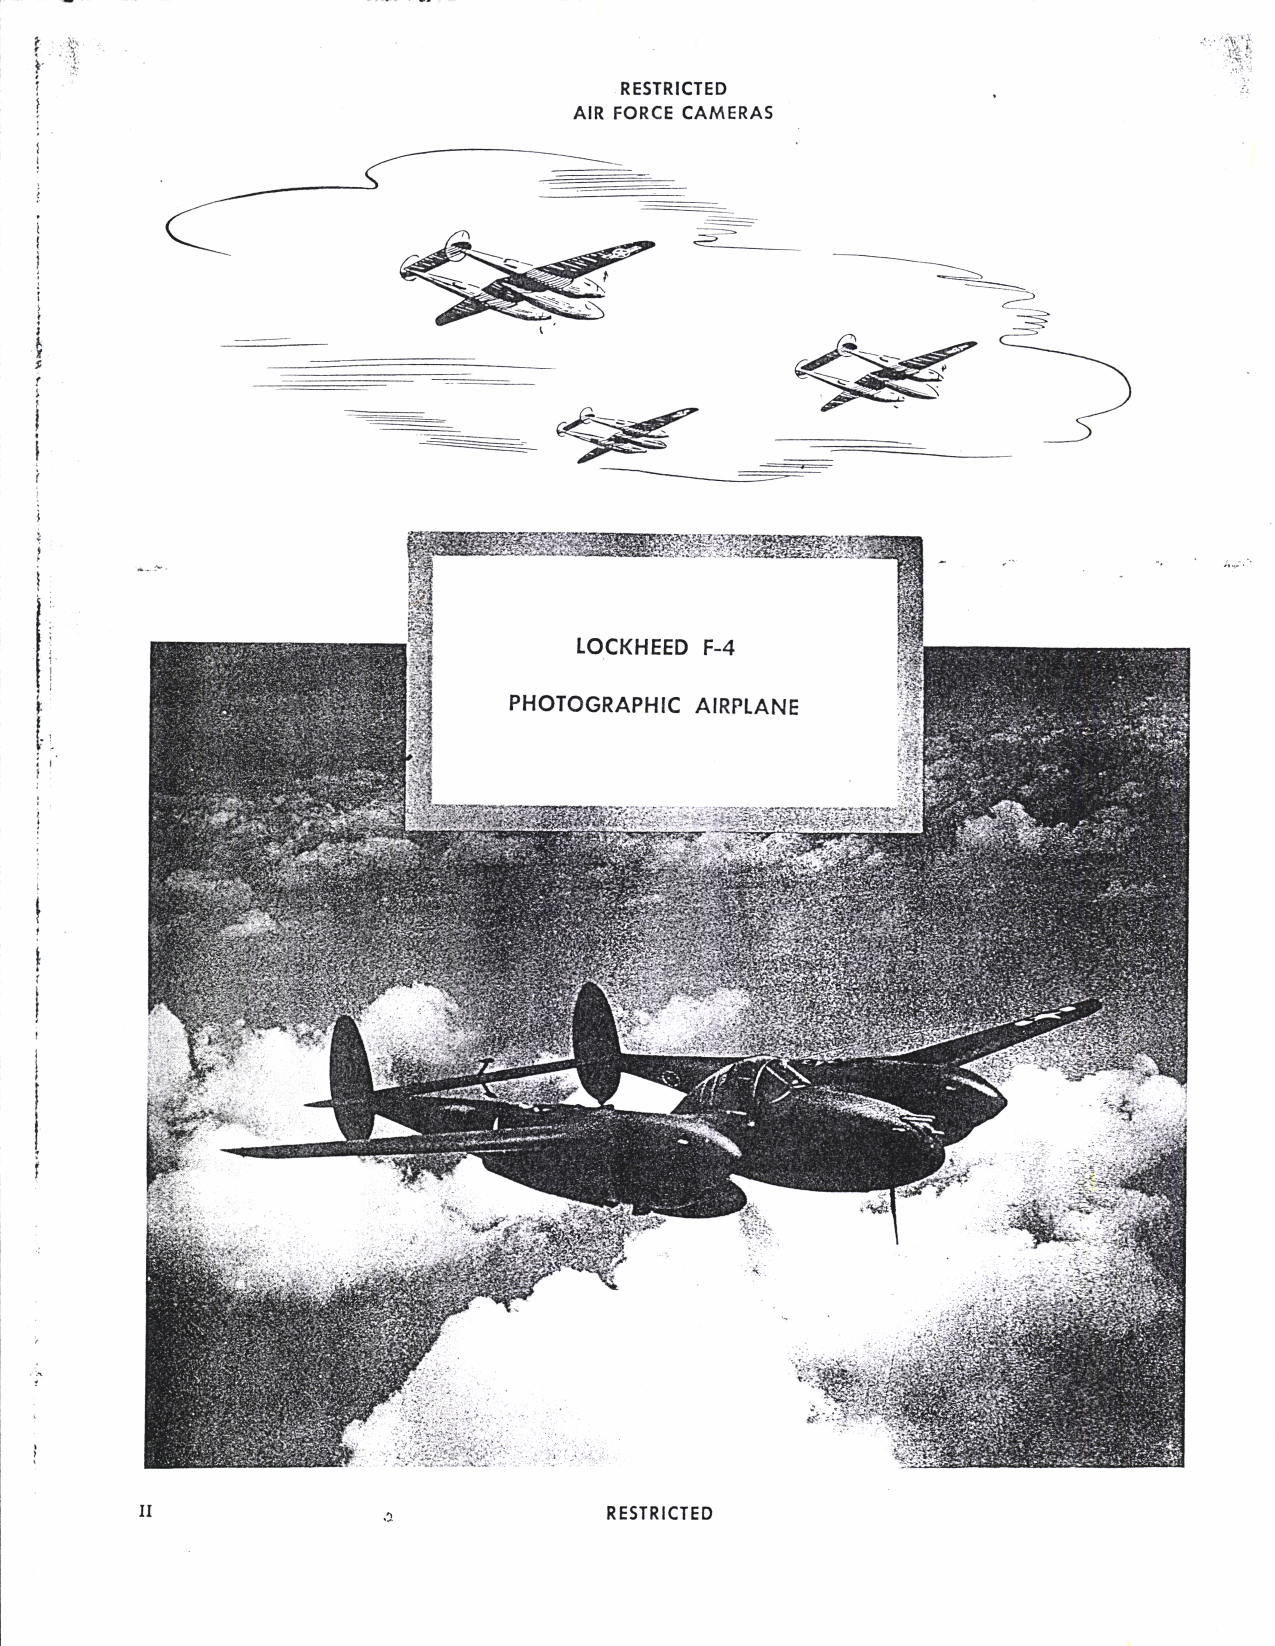 Sample page 6 from AirCorps Library document: Catalog - Description of Air Force Cameras and Accessory Equipment